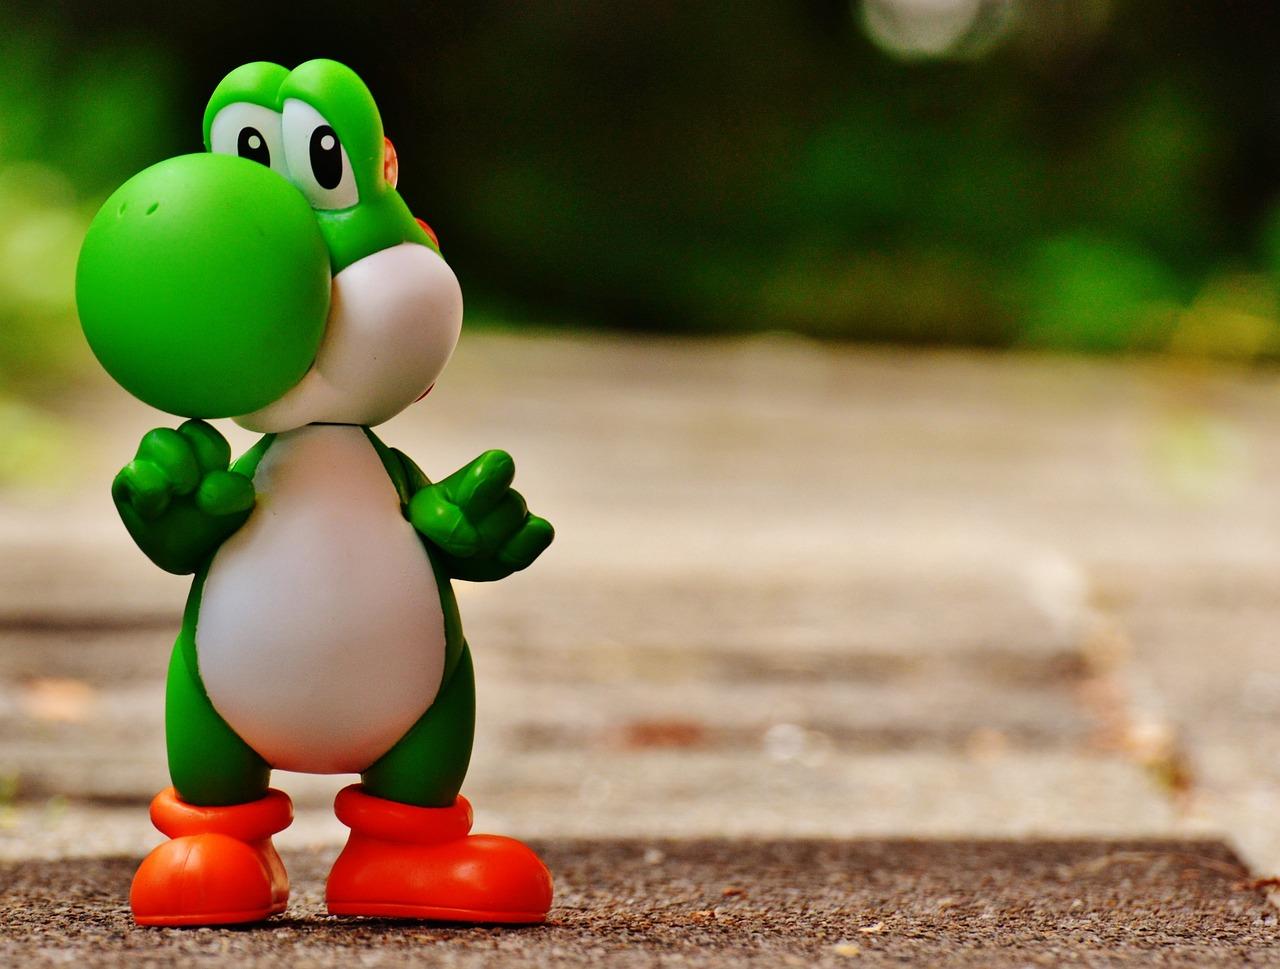 Is Yoshi a boy or girl from Mario?